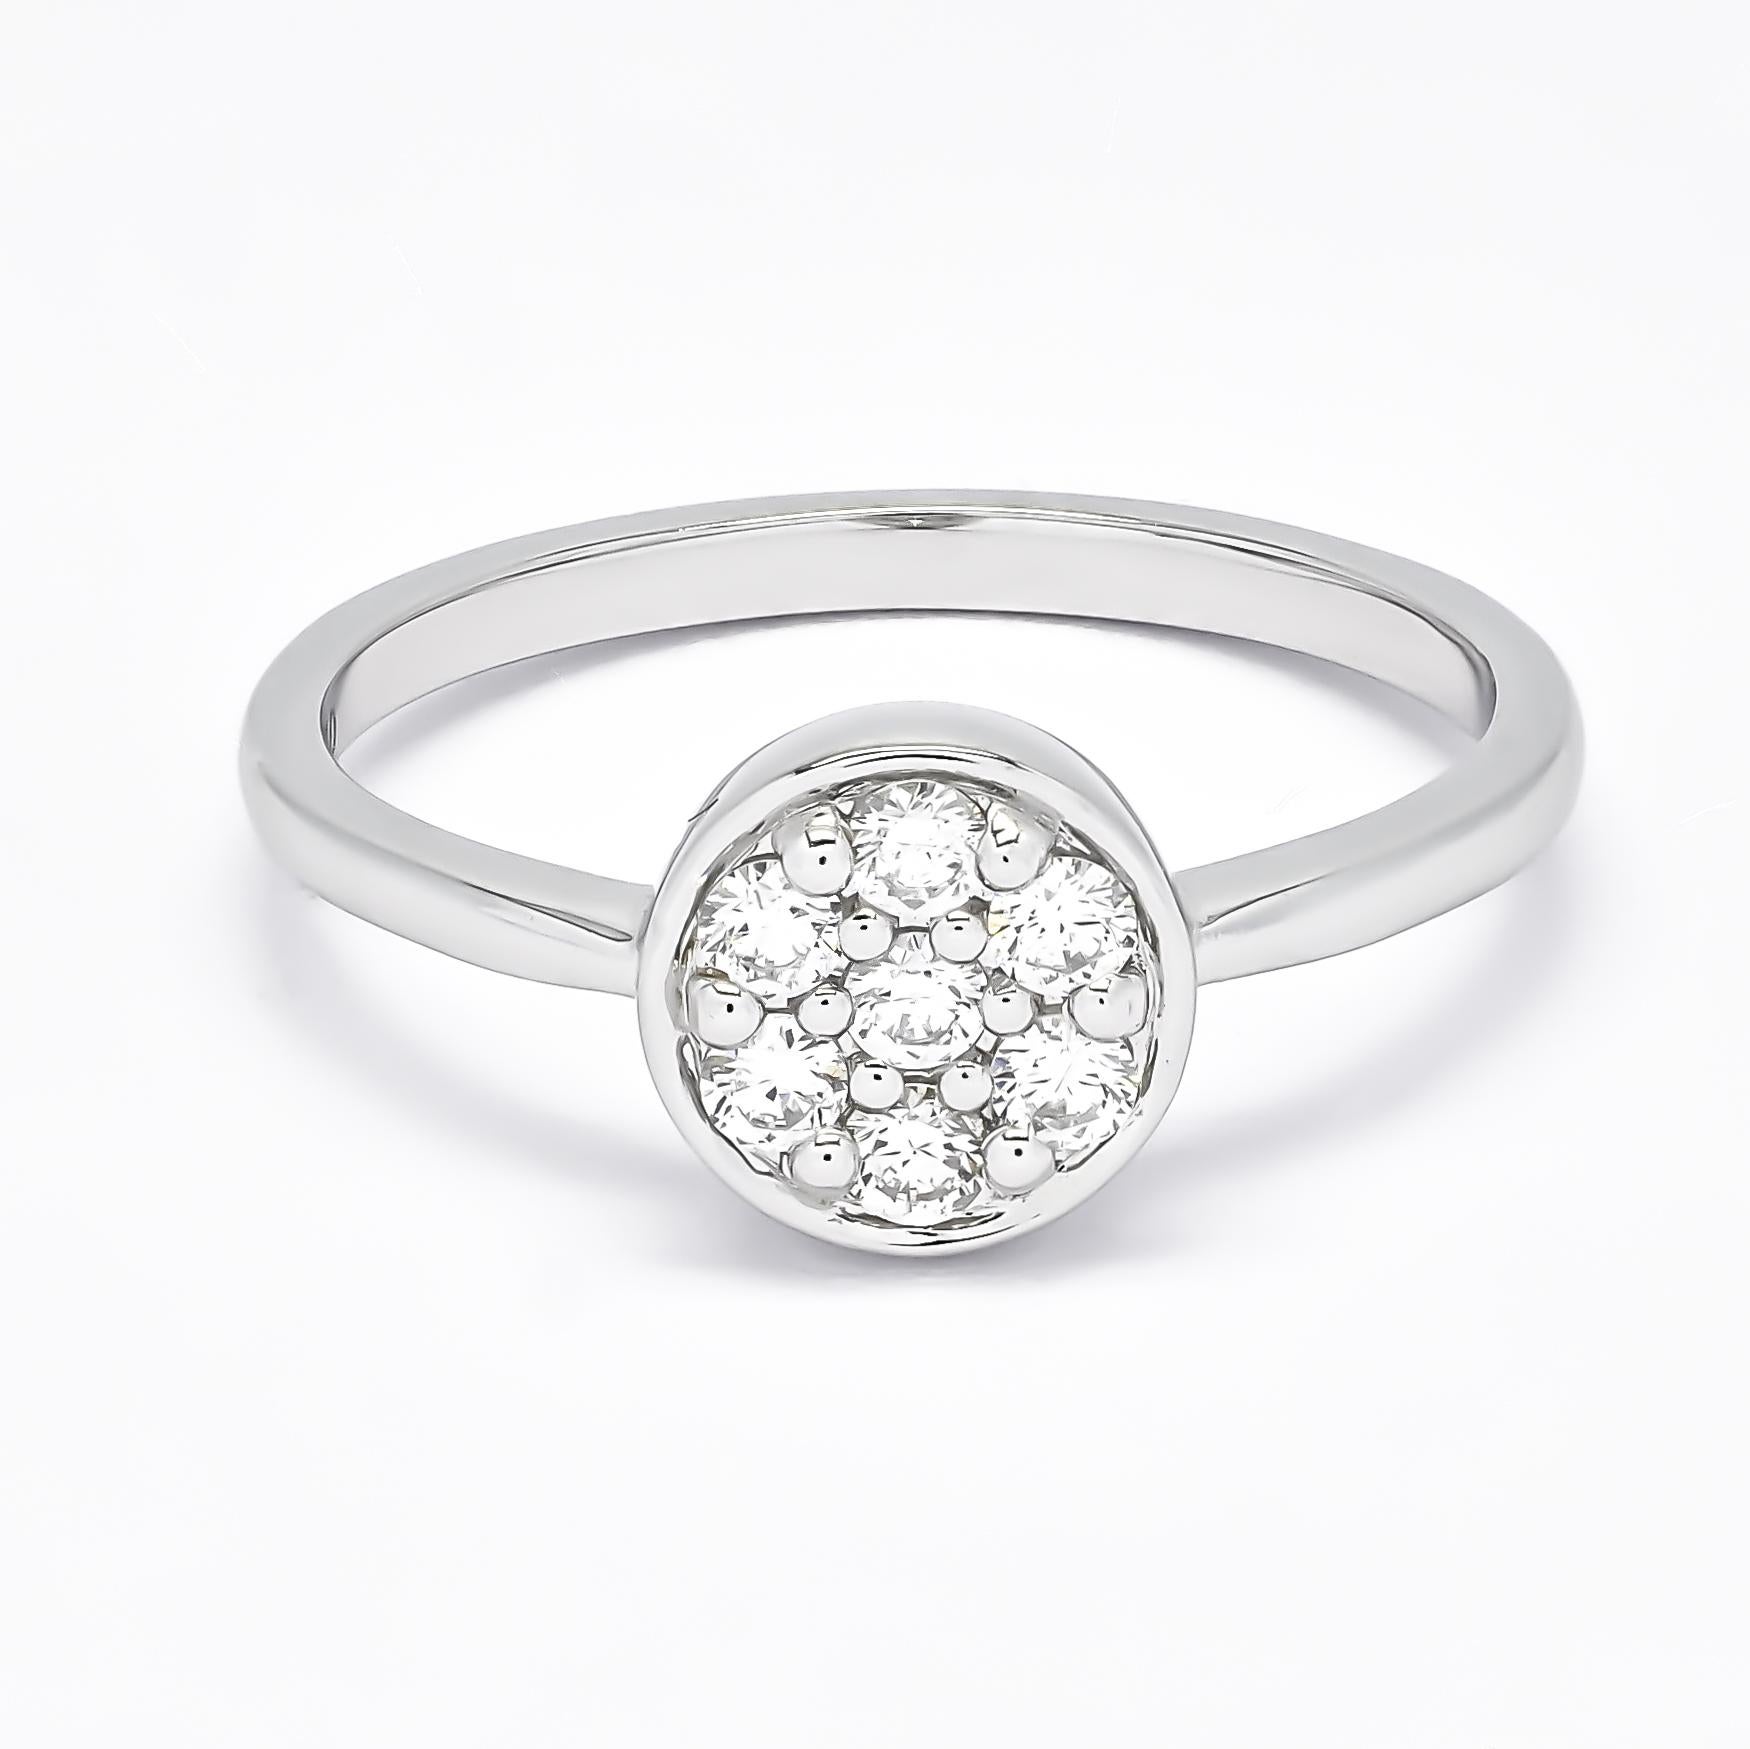 Crafted with precision and care, the Natural Diamond 1.00CT, 18Karat White Gold Diamond Bezel Set Cluster Ring exudes timeless elegance. Made from the radiant beauty of 18-karat white gold, this ring showcases a captivating cluster of natural